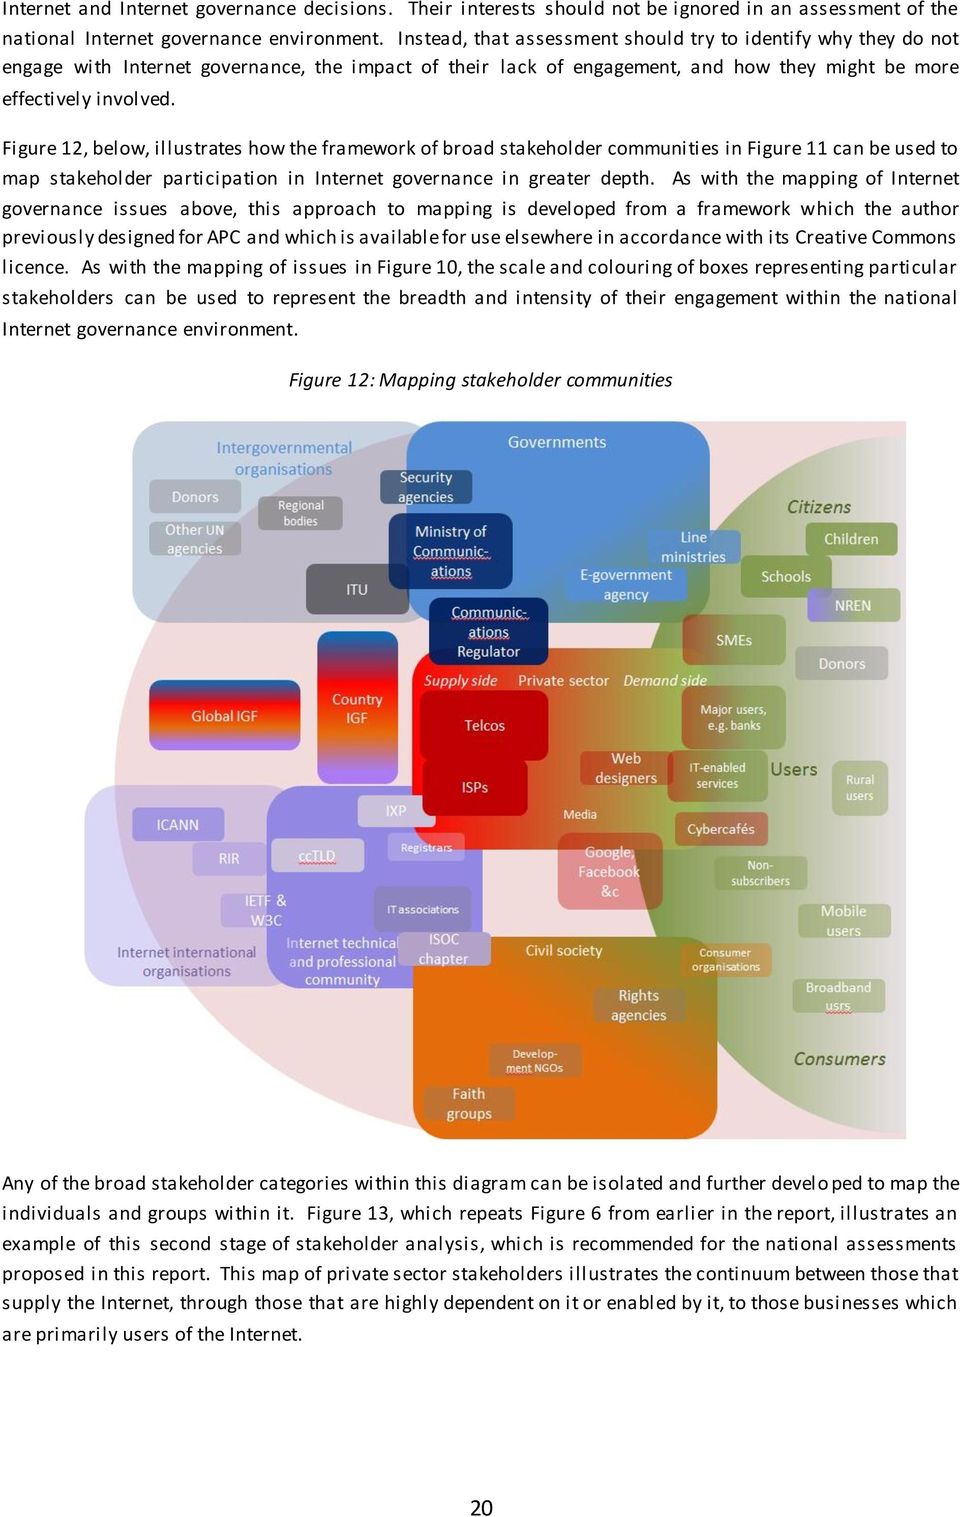 Figure 12, below, illustrates how the framework of broad stakeholder communities in Figure 11 can be used to map stakeholder participation in Internet governance in greater depth.